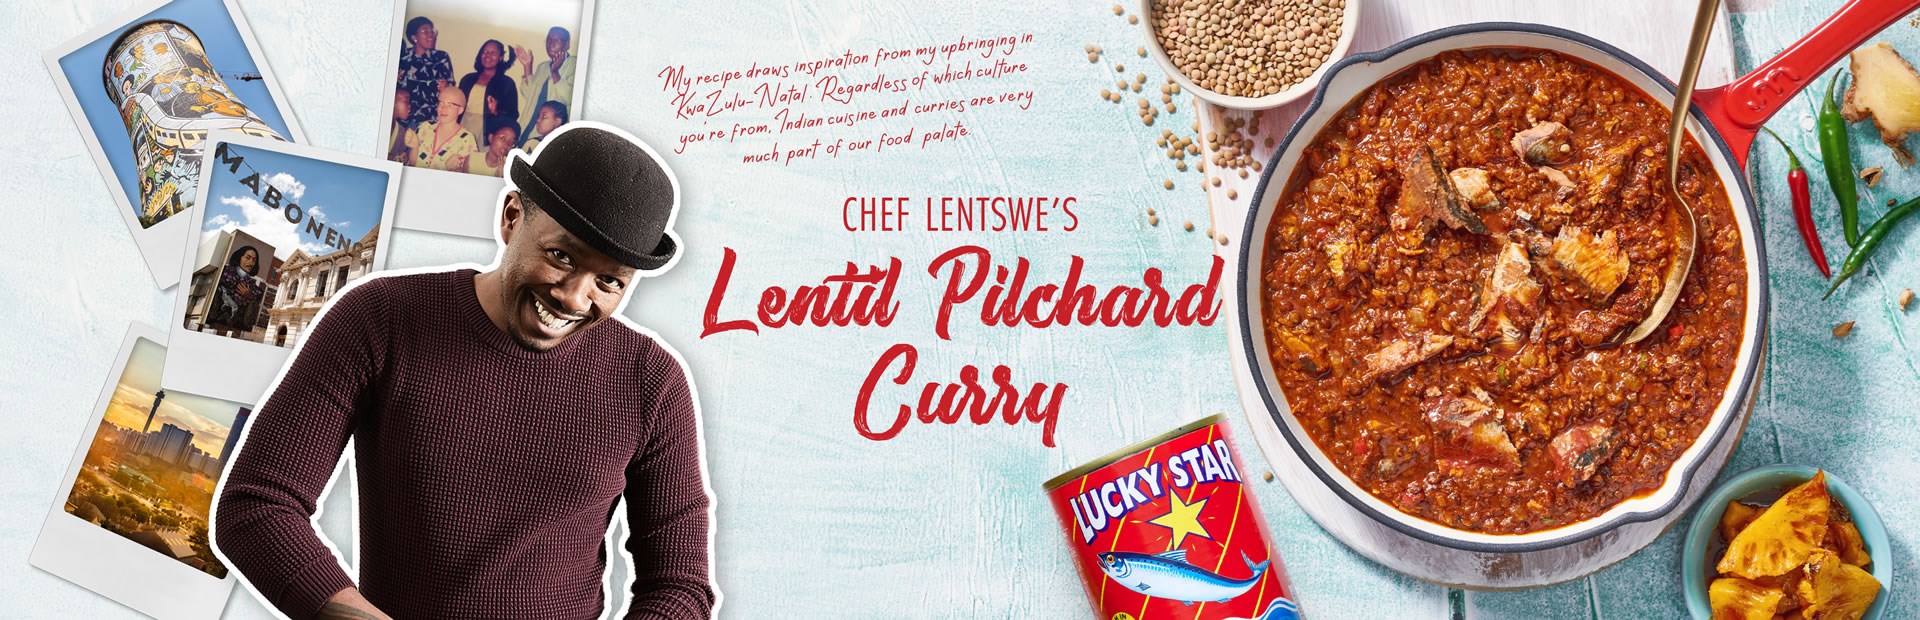 CHEF LENTSWE’S CARAMELISED PINEAPPLE Lentil Pilchard Curry